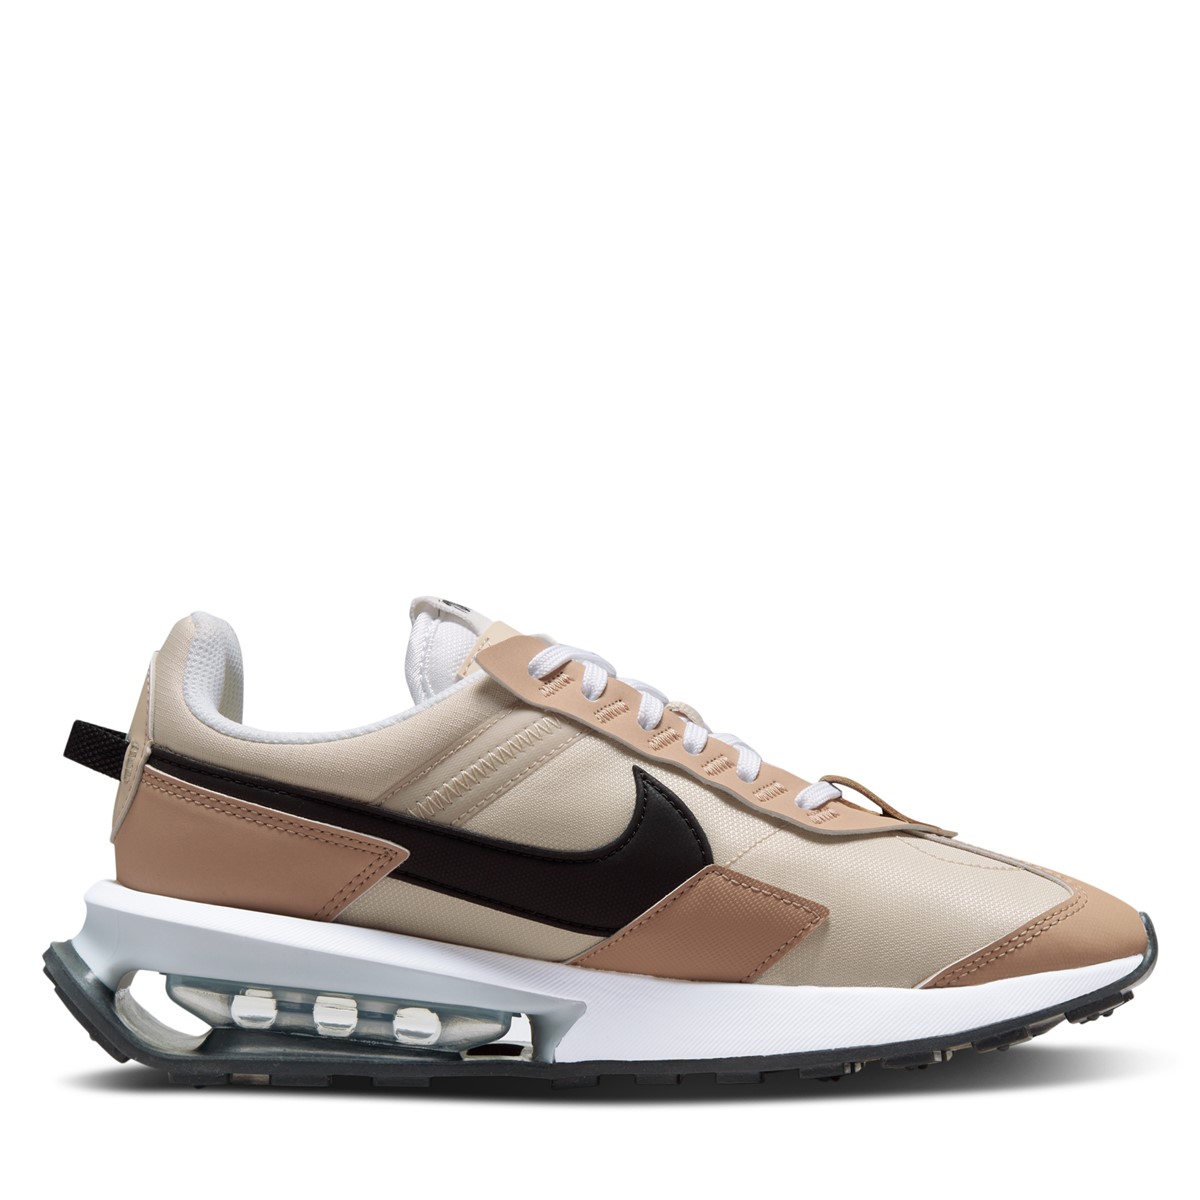 Women's Air Max Pre-Day Sneakers in Nude/White